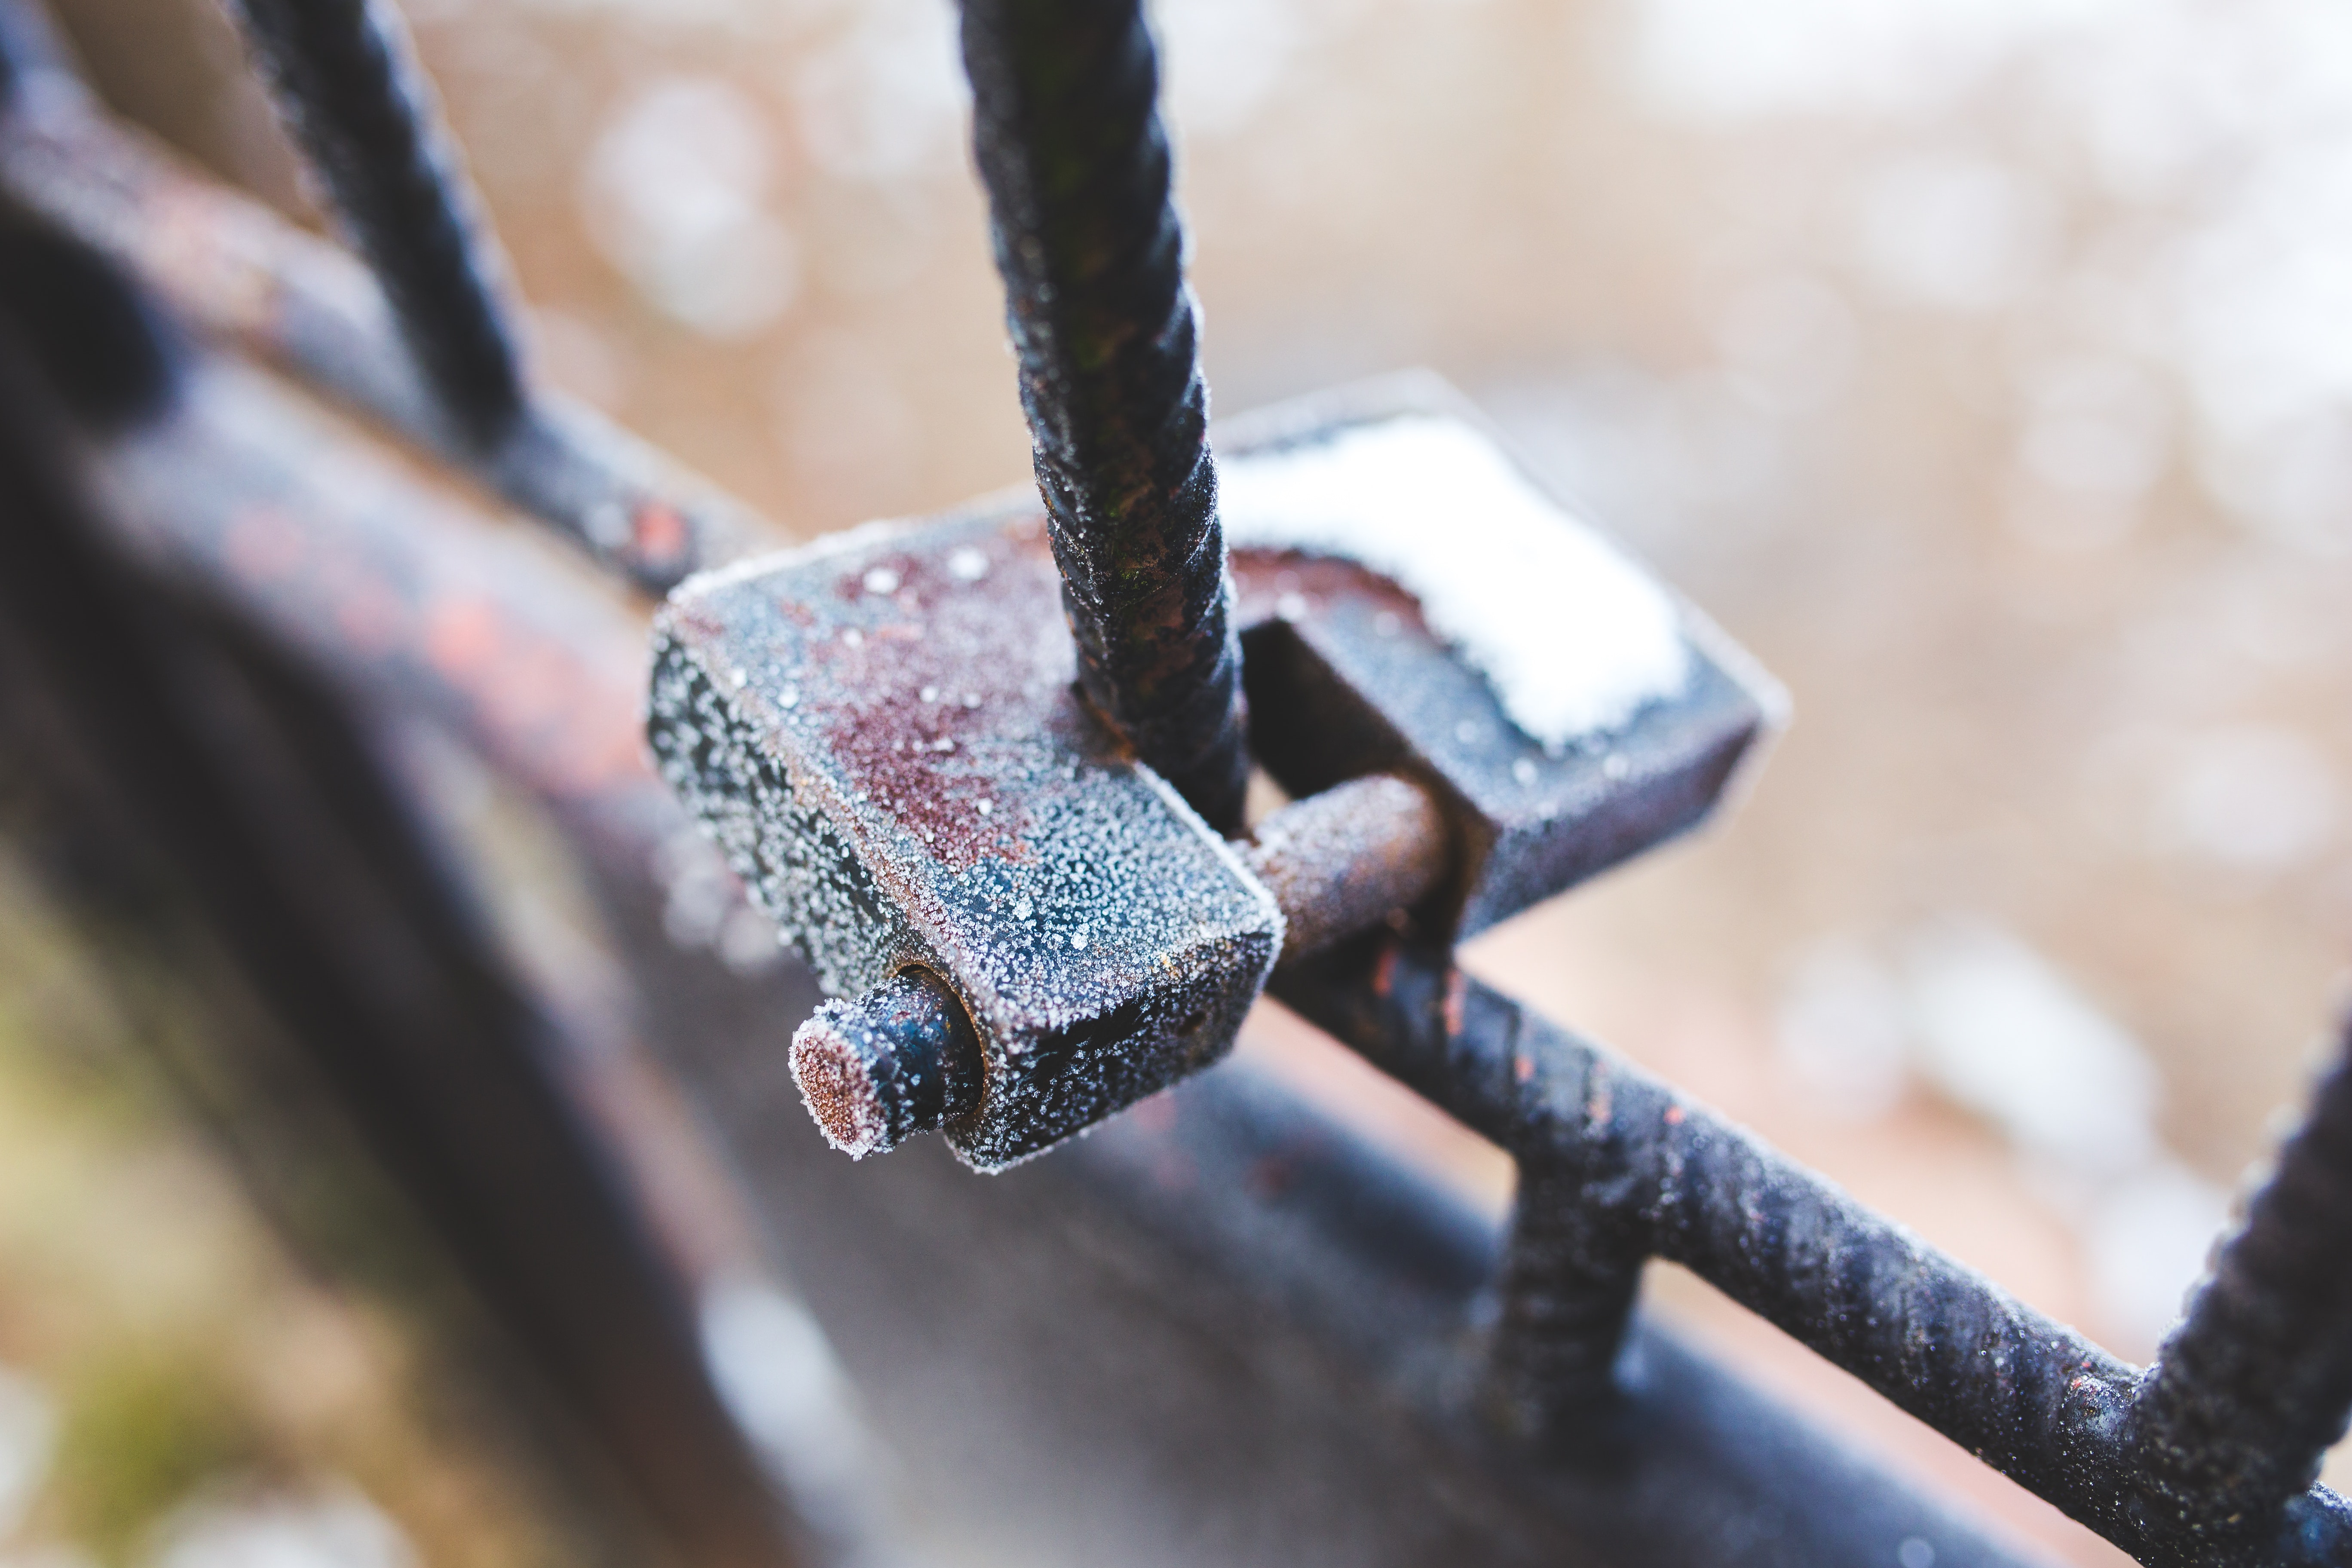 Rusty padlock covered with hoarfrost ice crystals, Blur, Outdoors, Wire, Winter, HQ Photo